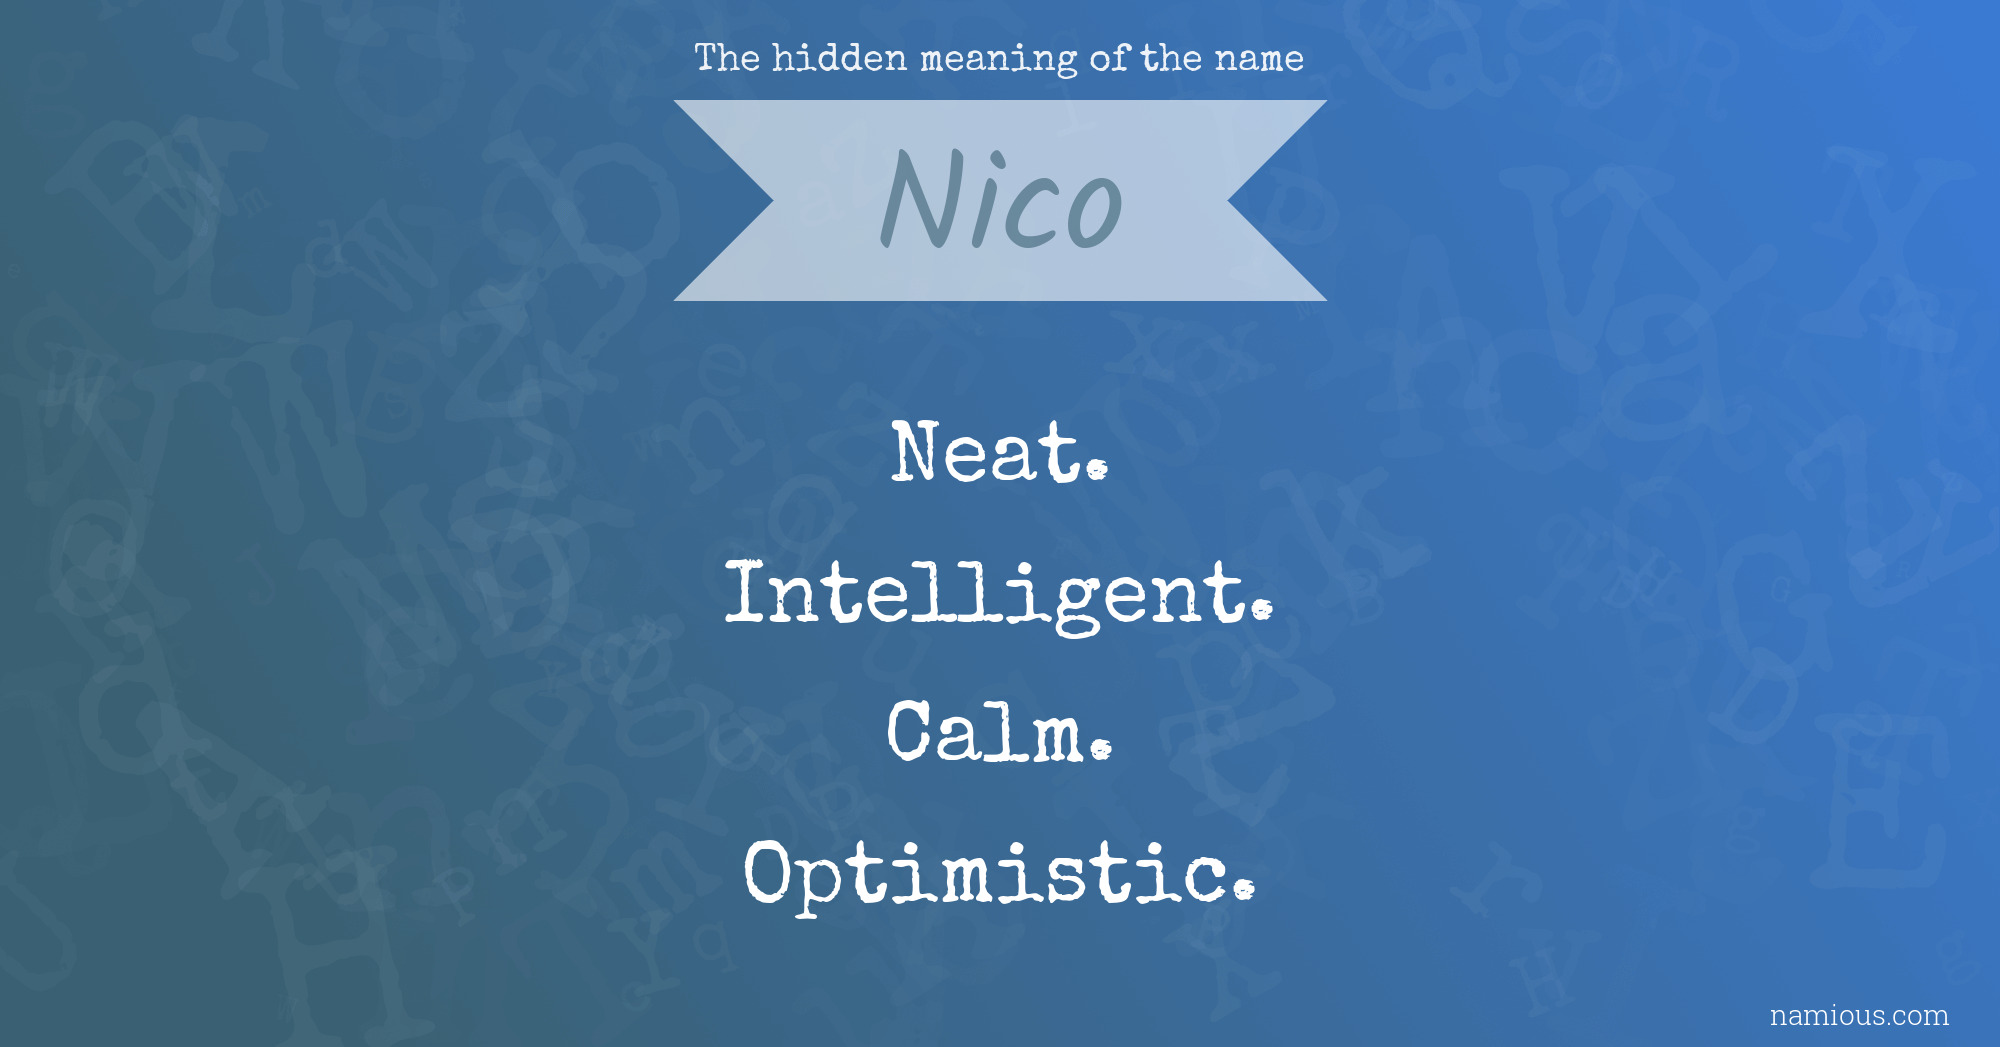 The hidden meaning of the name Nico | Namious